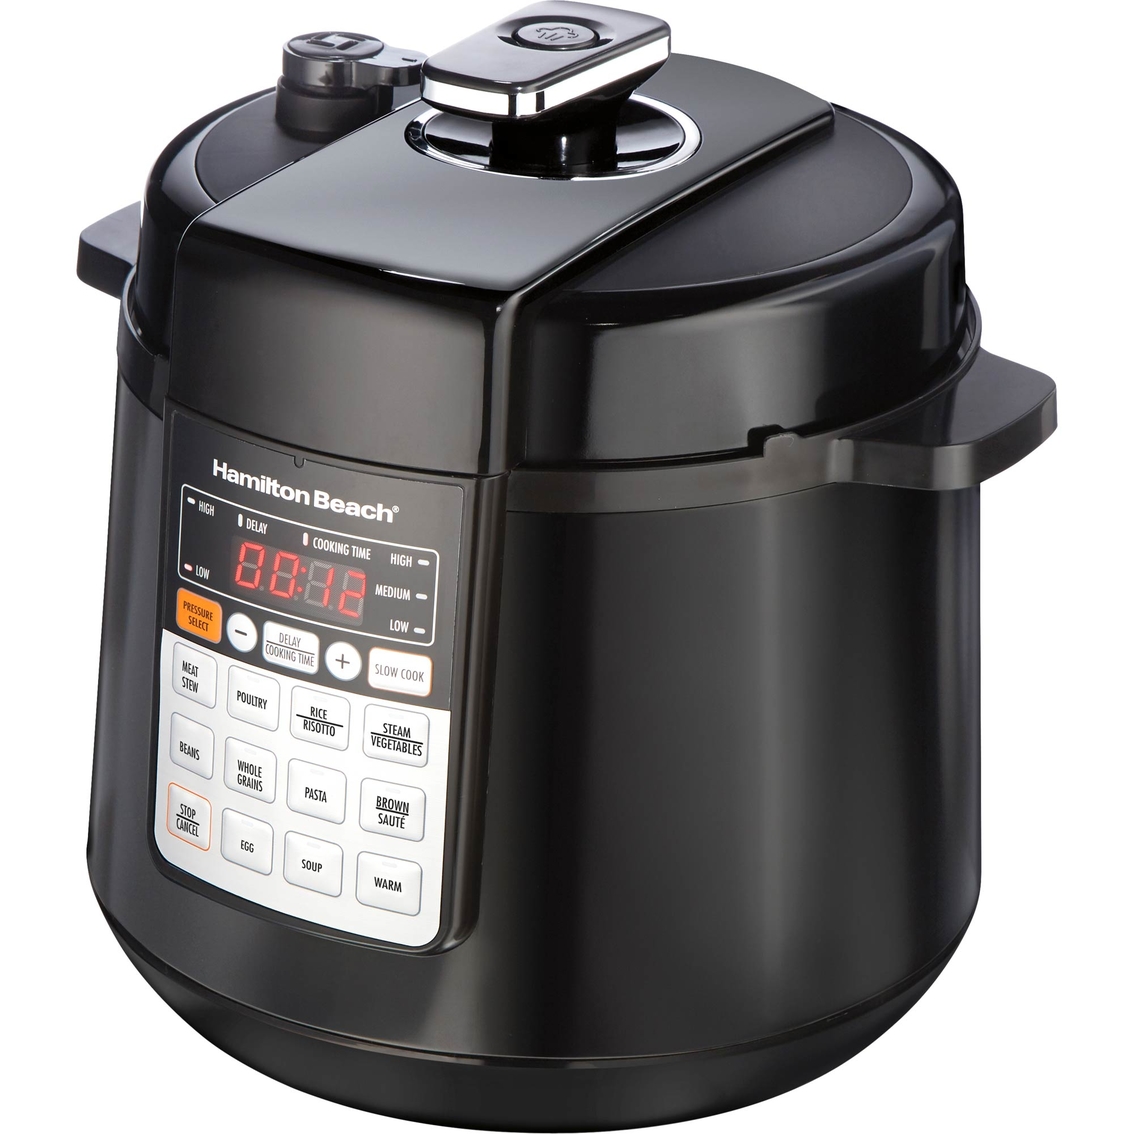 Hamilton Beach Multi Function Pressure Cooker | Cookers & Steamers ...